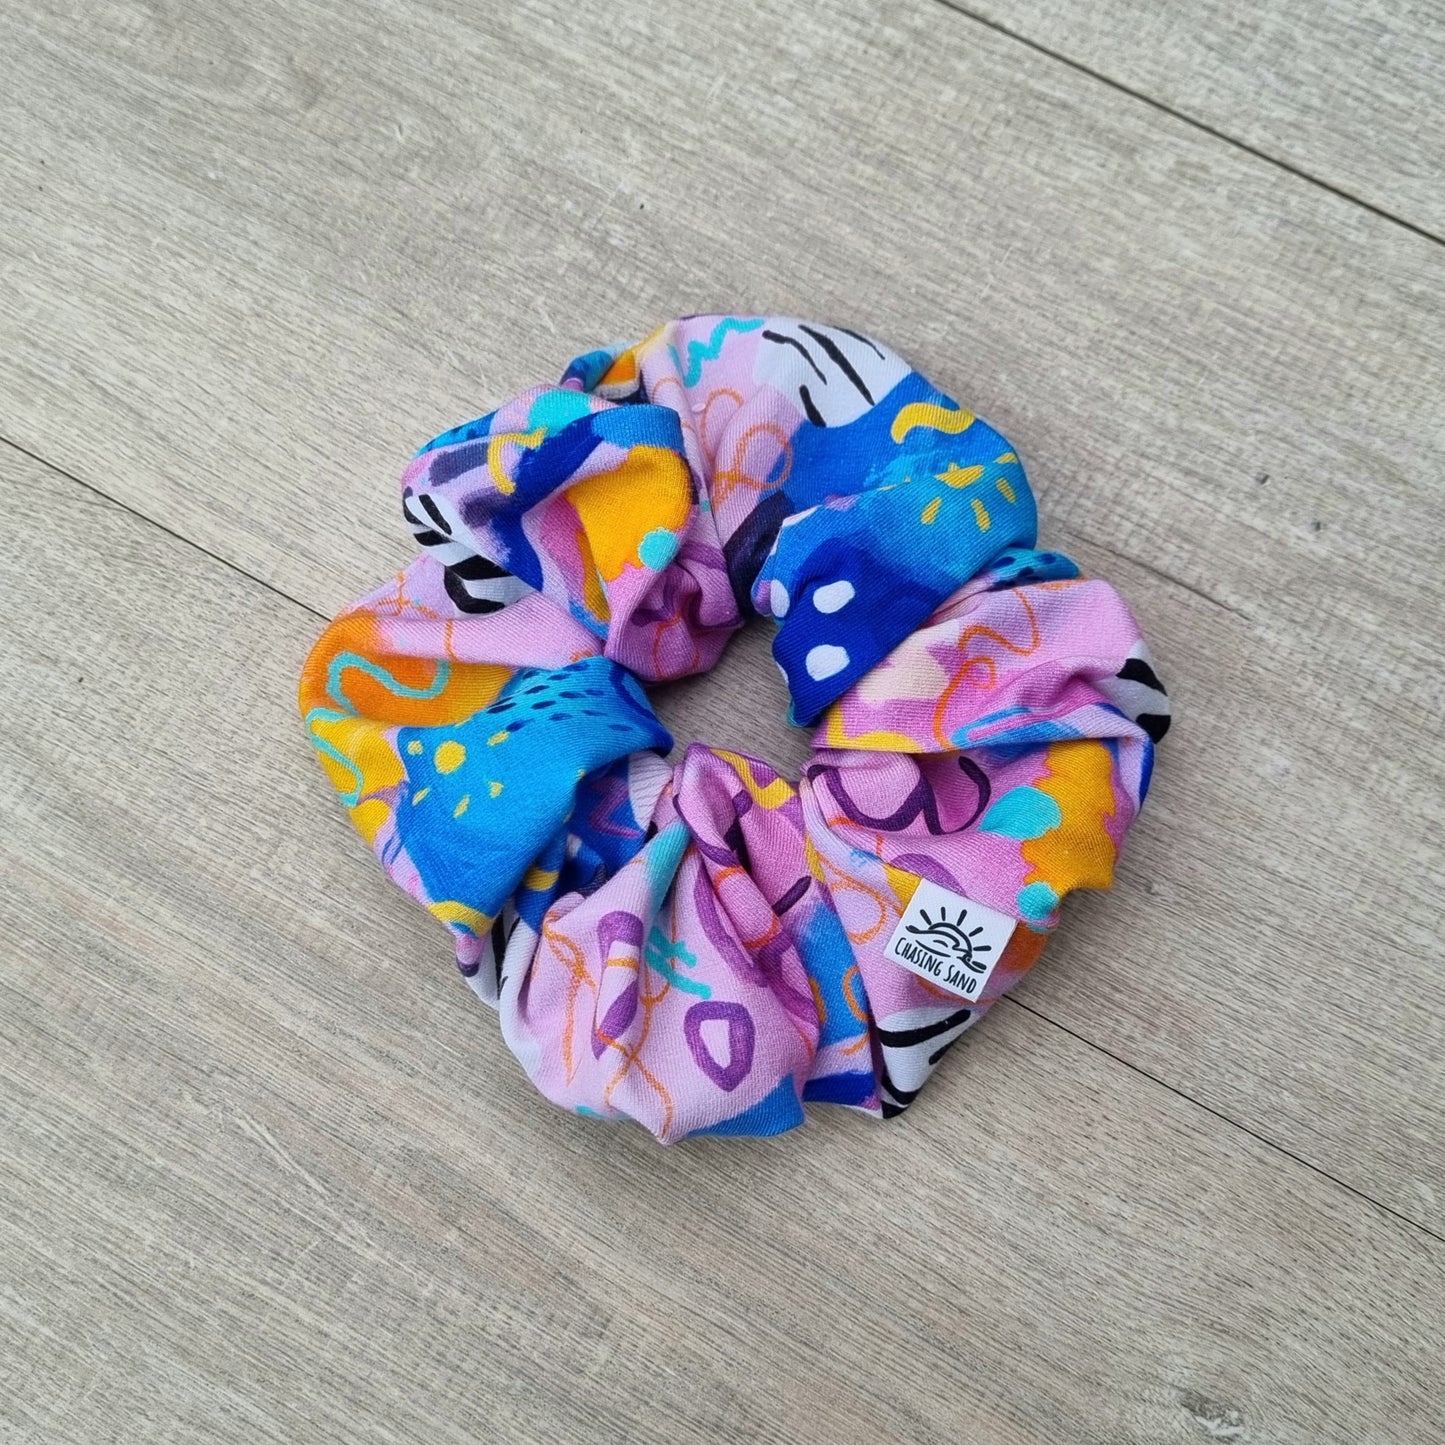 Scrunchie - Swirls against wooden backdrop. Blue, orange and purple abstract pattern on pink background.